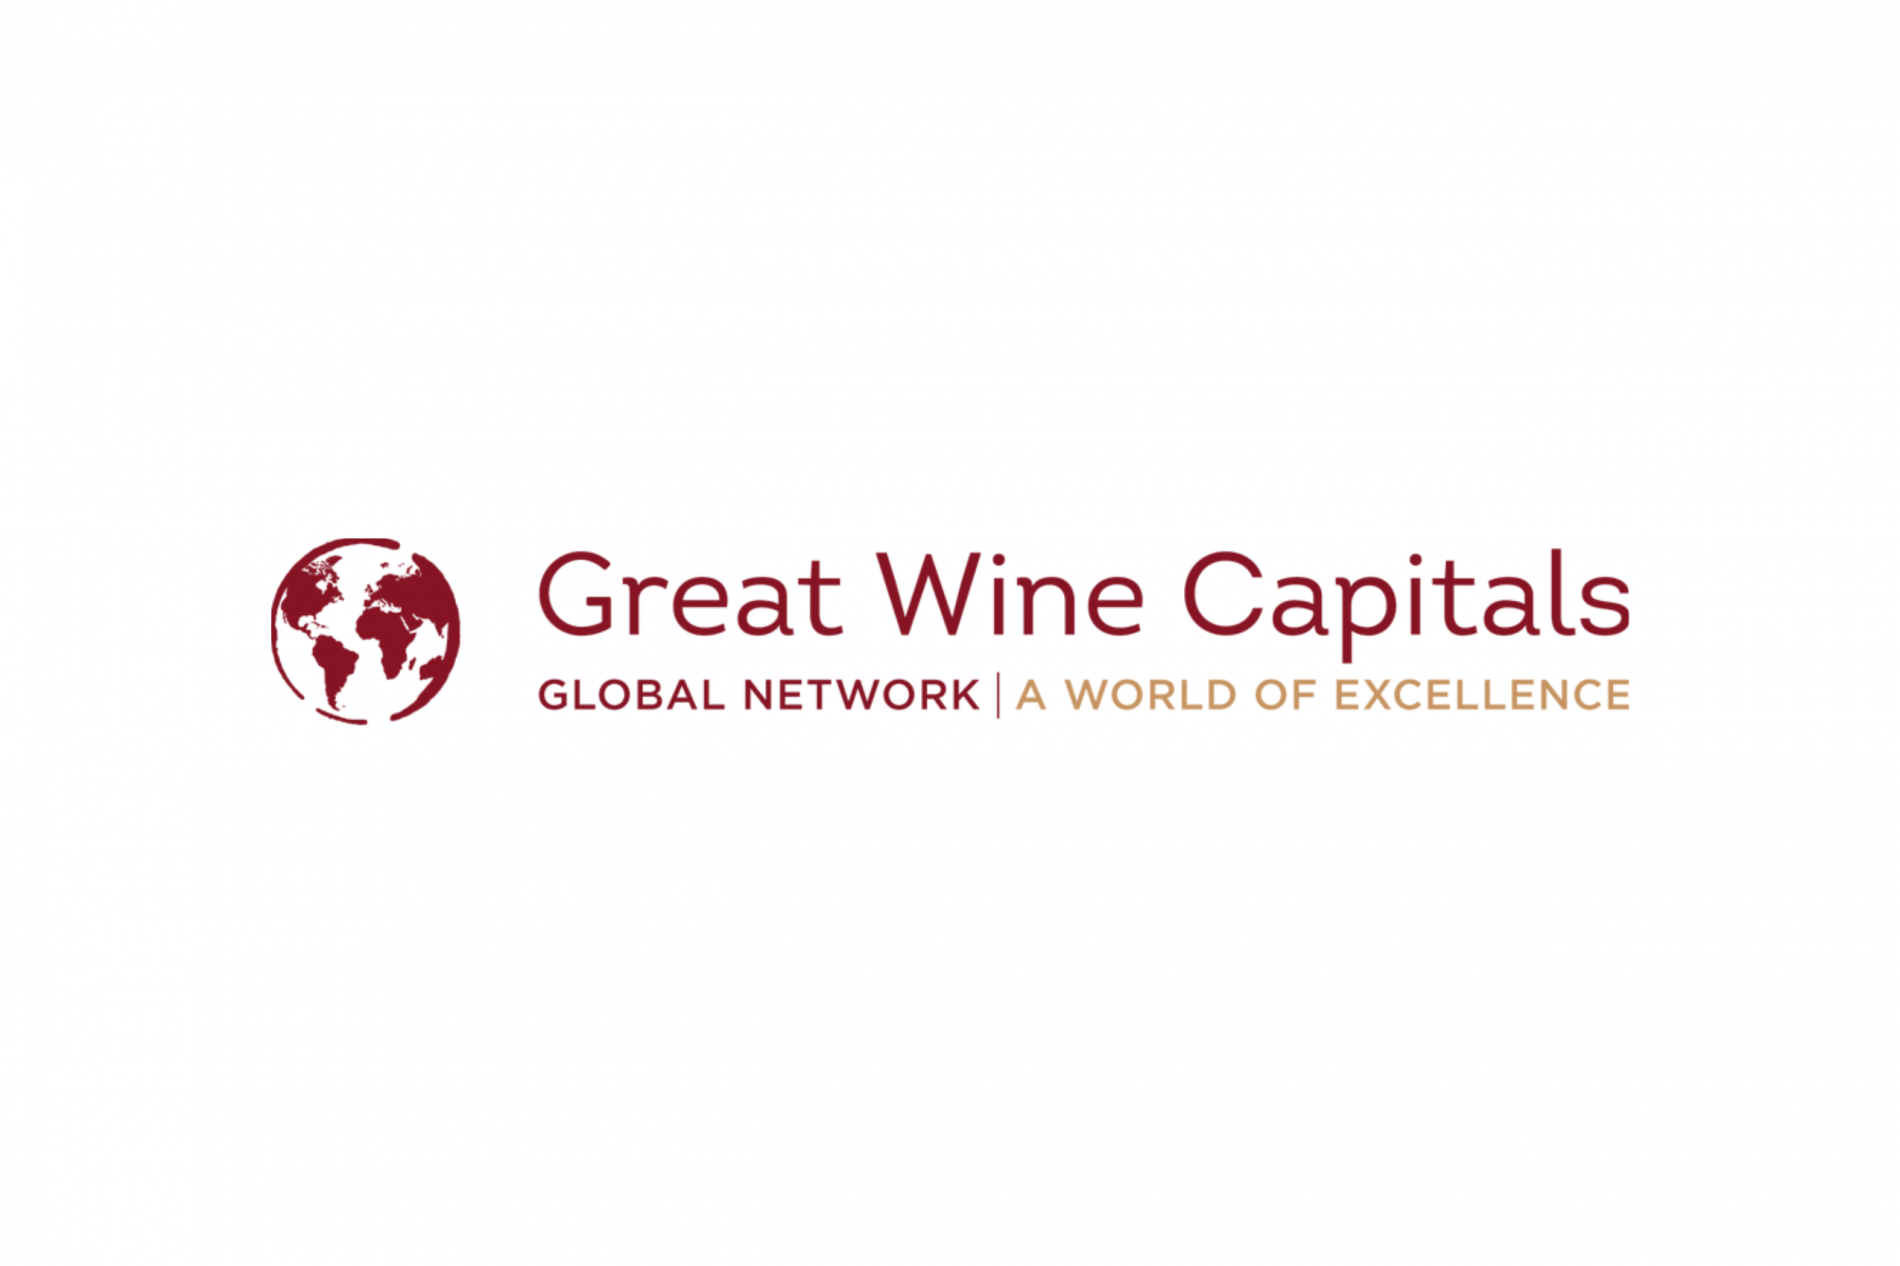 Great Wine Capitals, a global network,  a world of excellence part A